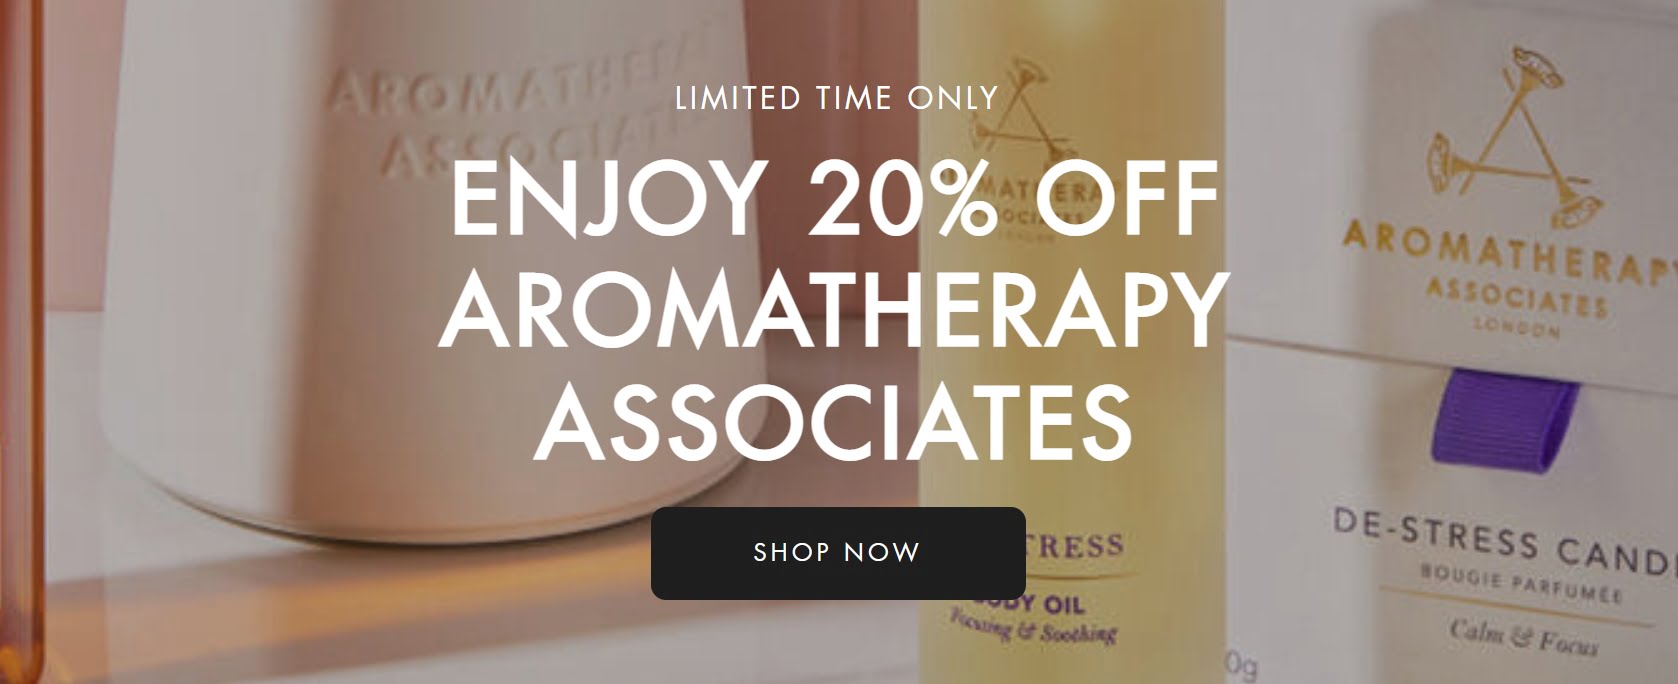 20% off Aromatherapy Associates at Space NK